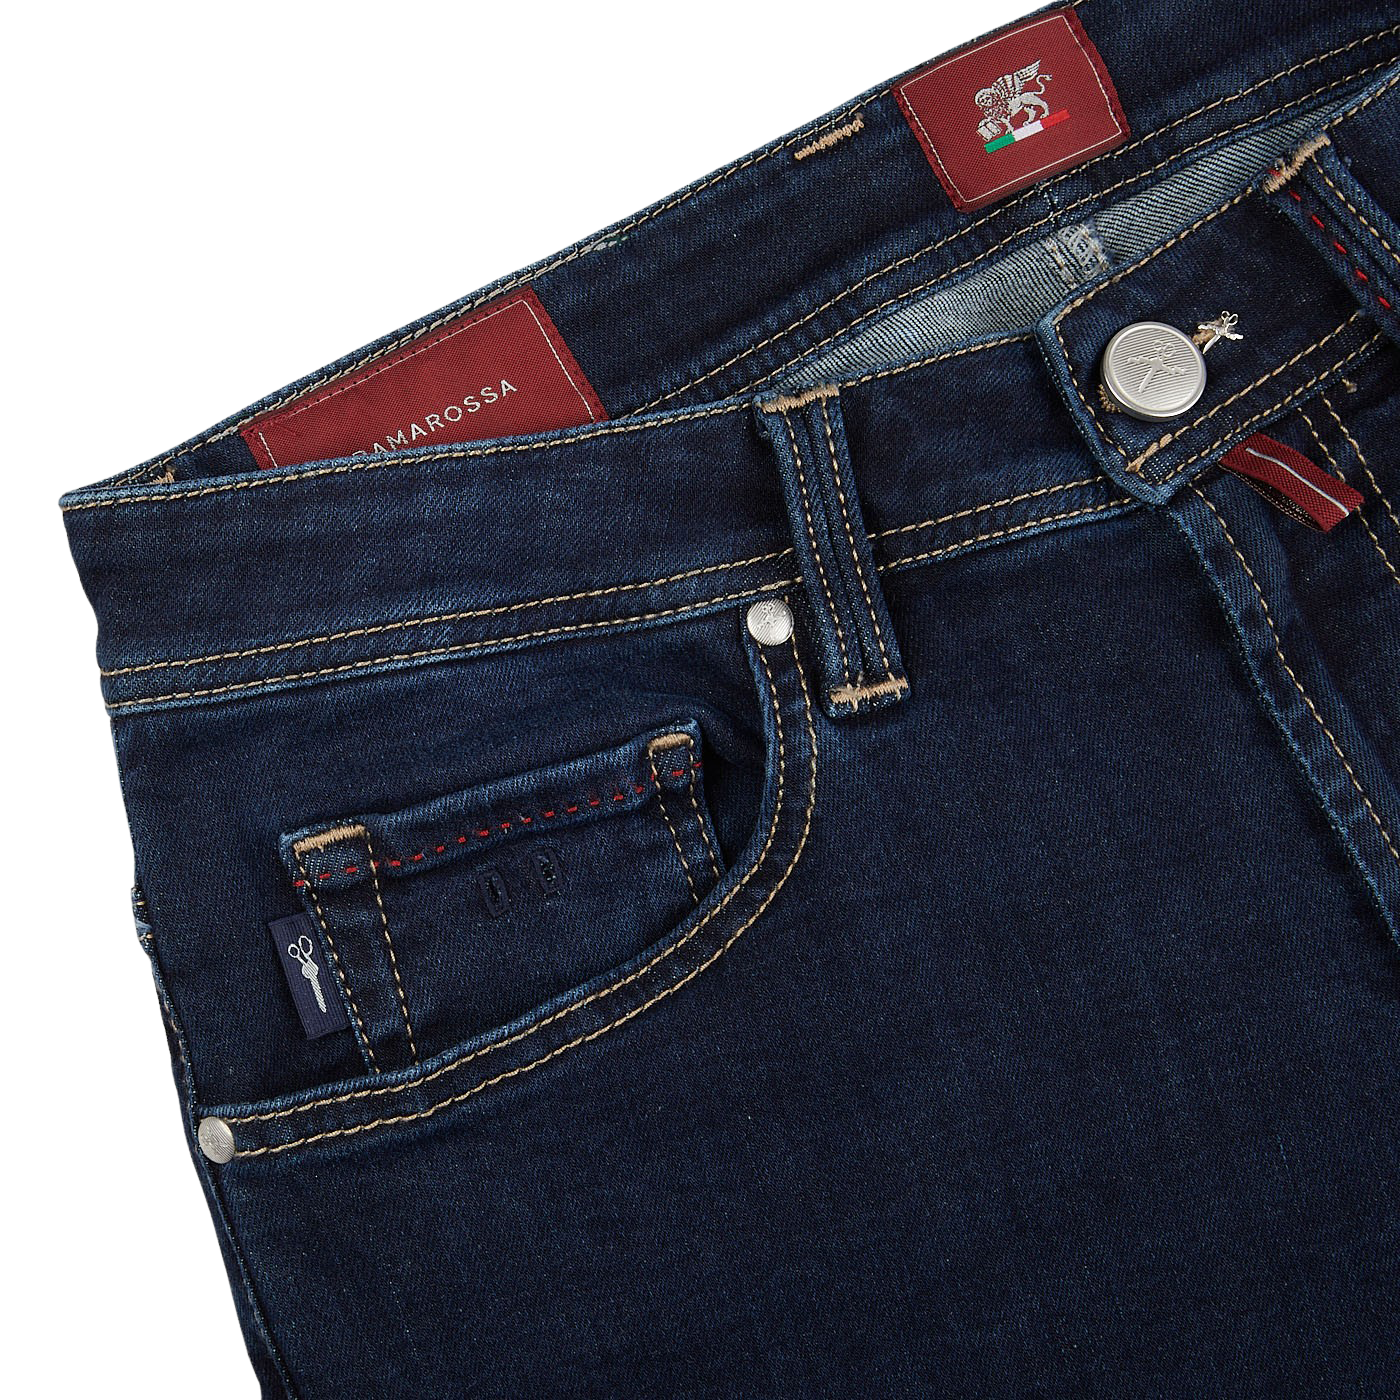 A pair of Dark Blue Leonardo 1 Month Jeans by Tramarossa with a red label, made from Japanese denim.